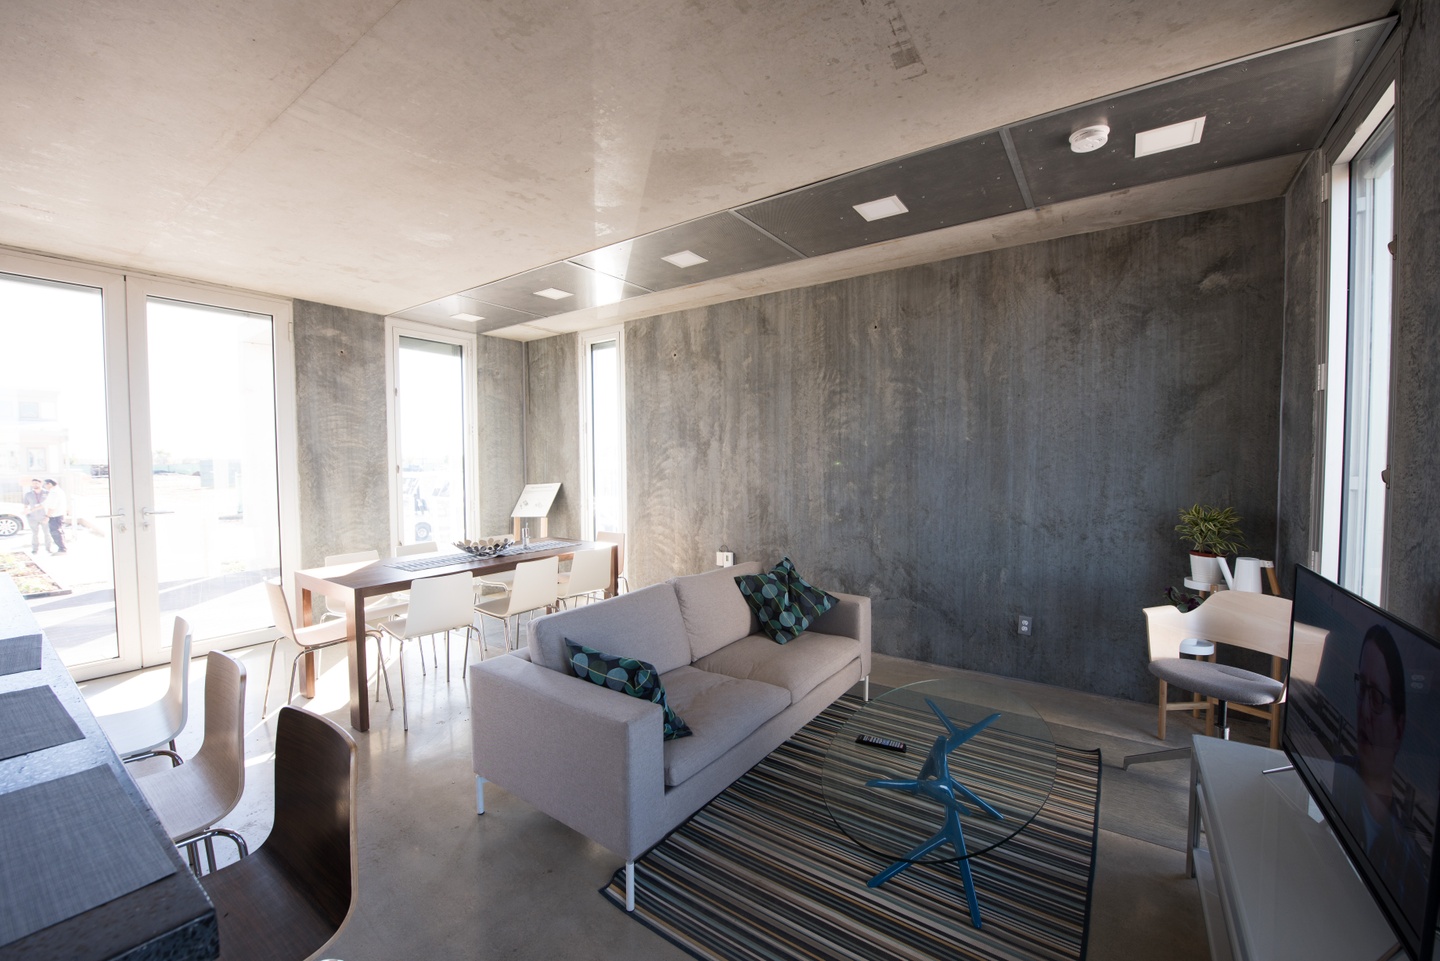 Interior of a house with concrete floors, walls, and ceiling with several full-height windows and furnished with neutral-toned modern furnishings.